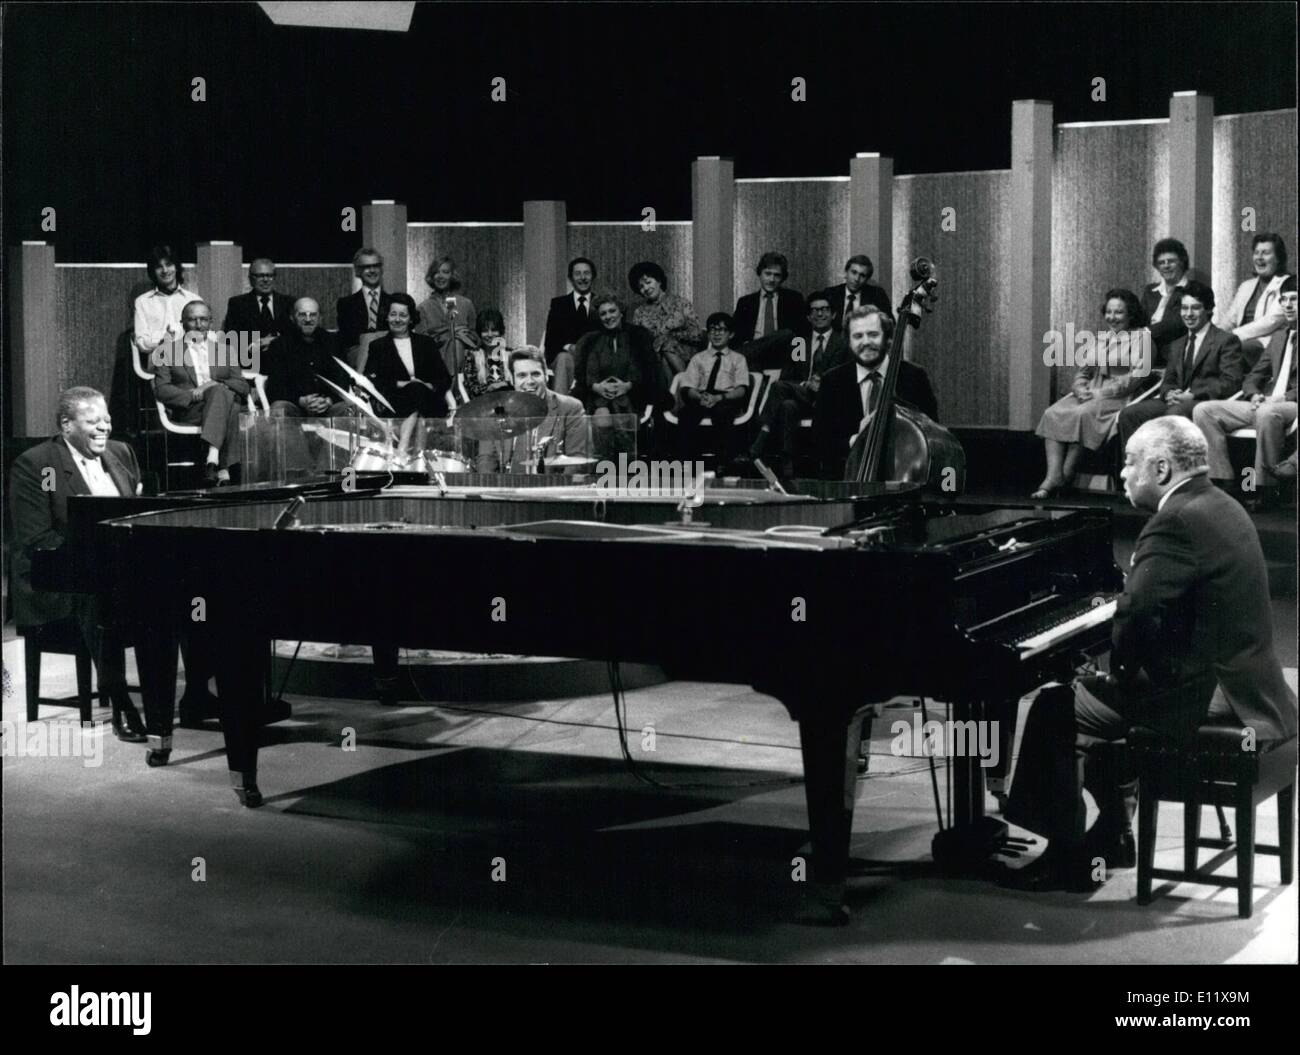 Oct. 10, 1980 - Oscar Peterson - Words And Music: Two musical giants of the jazz world meet to talk and make music together when Count Basie appears as one of Oscar Peterson's guests in the third programme of his series. Oscar Peterson (left) with Count Basie. Stock Photo